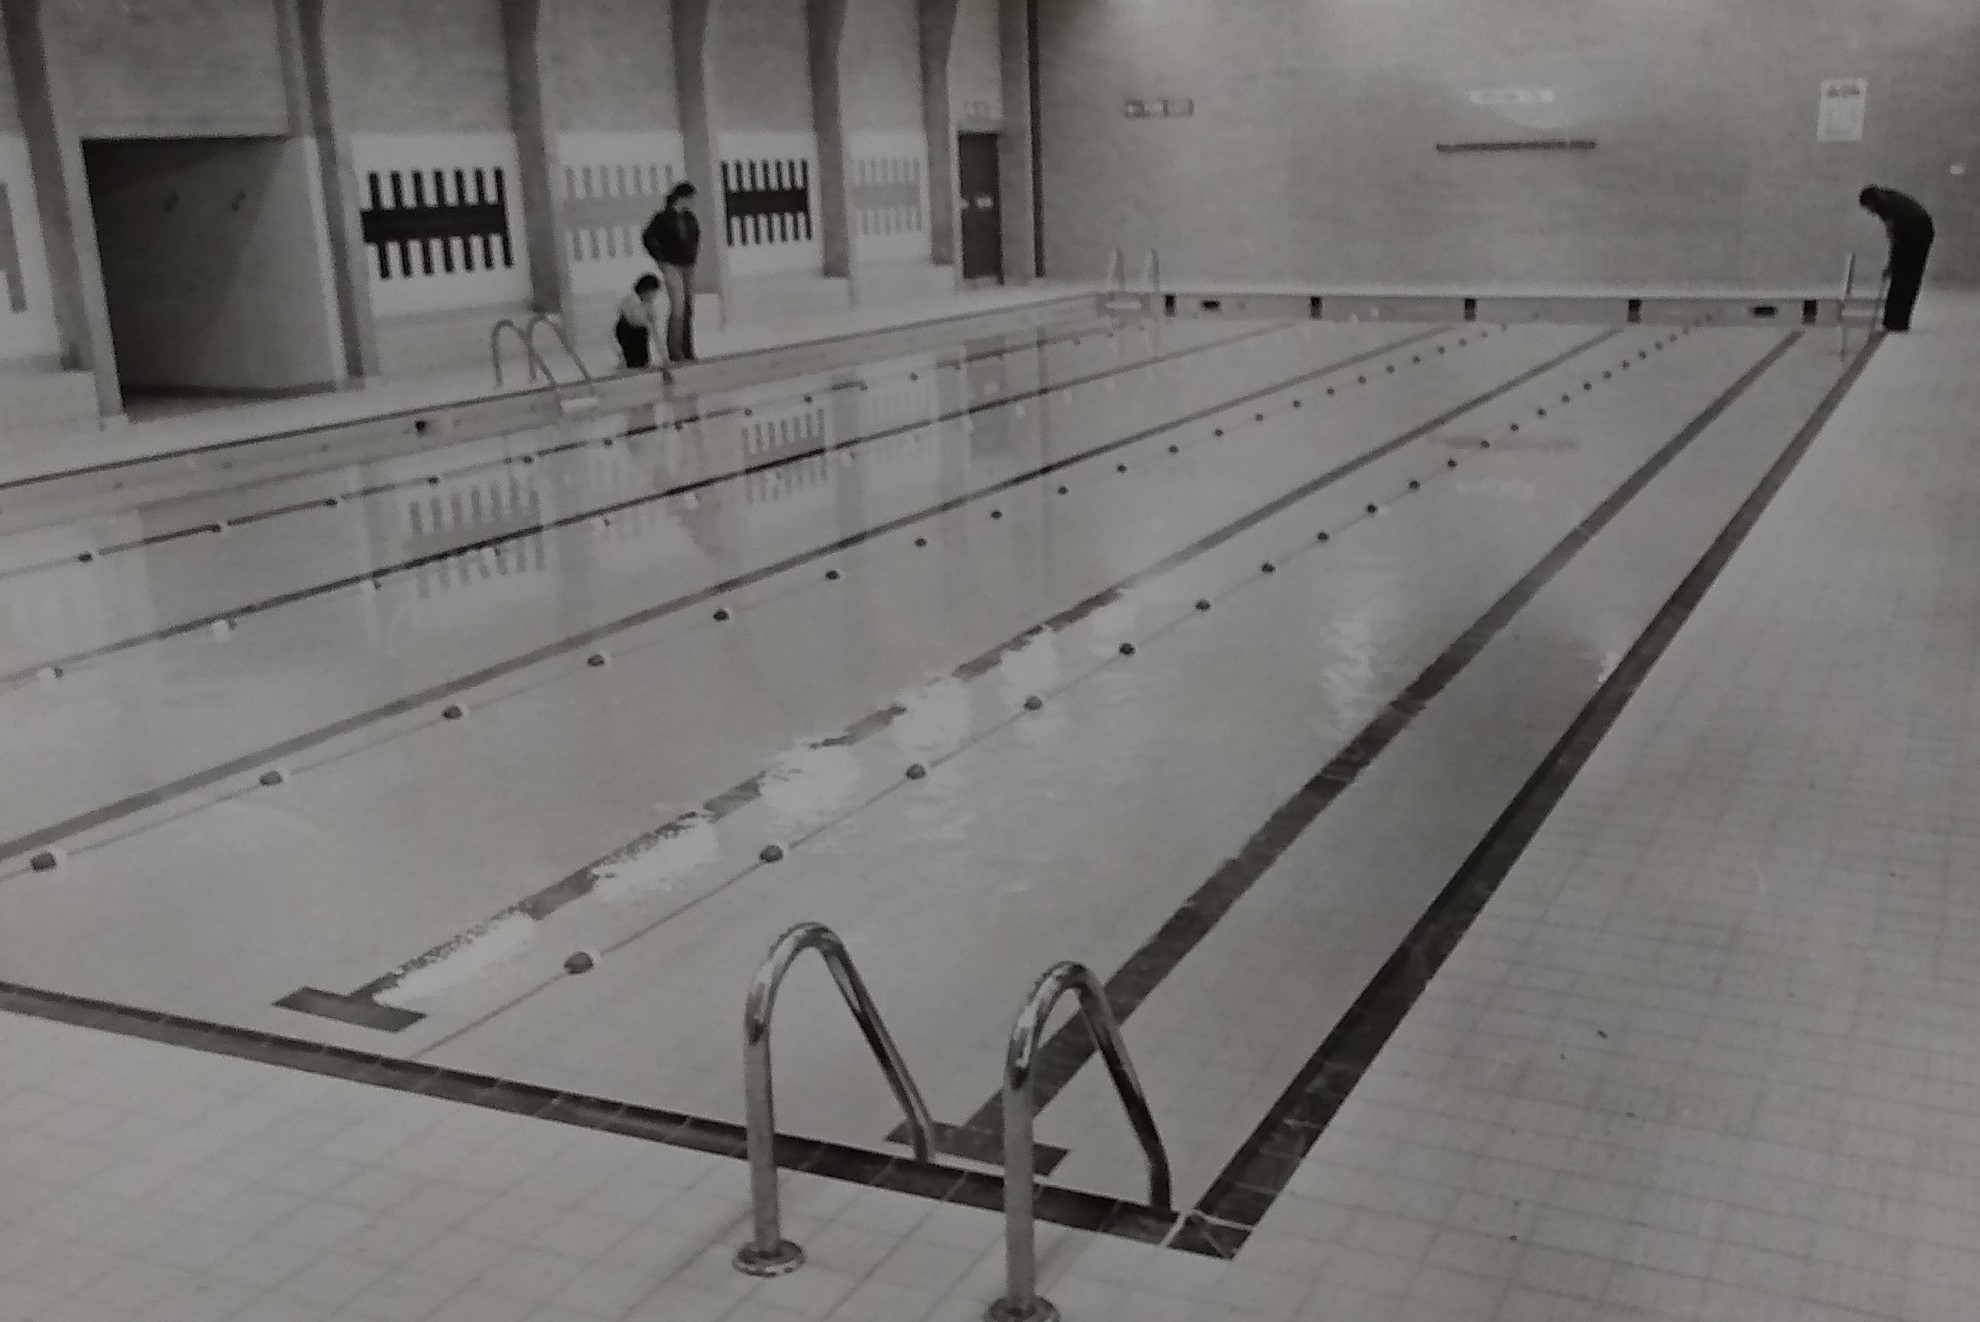 Dream come true - December 1977 and the pool is ready for use